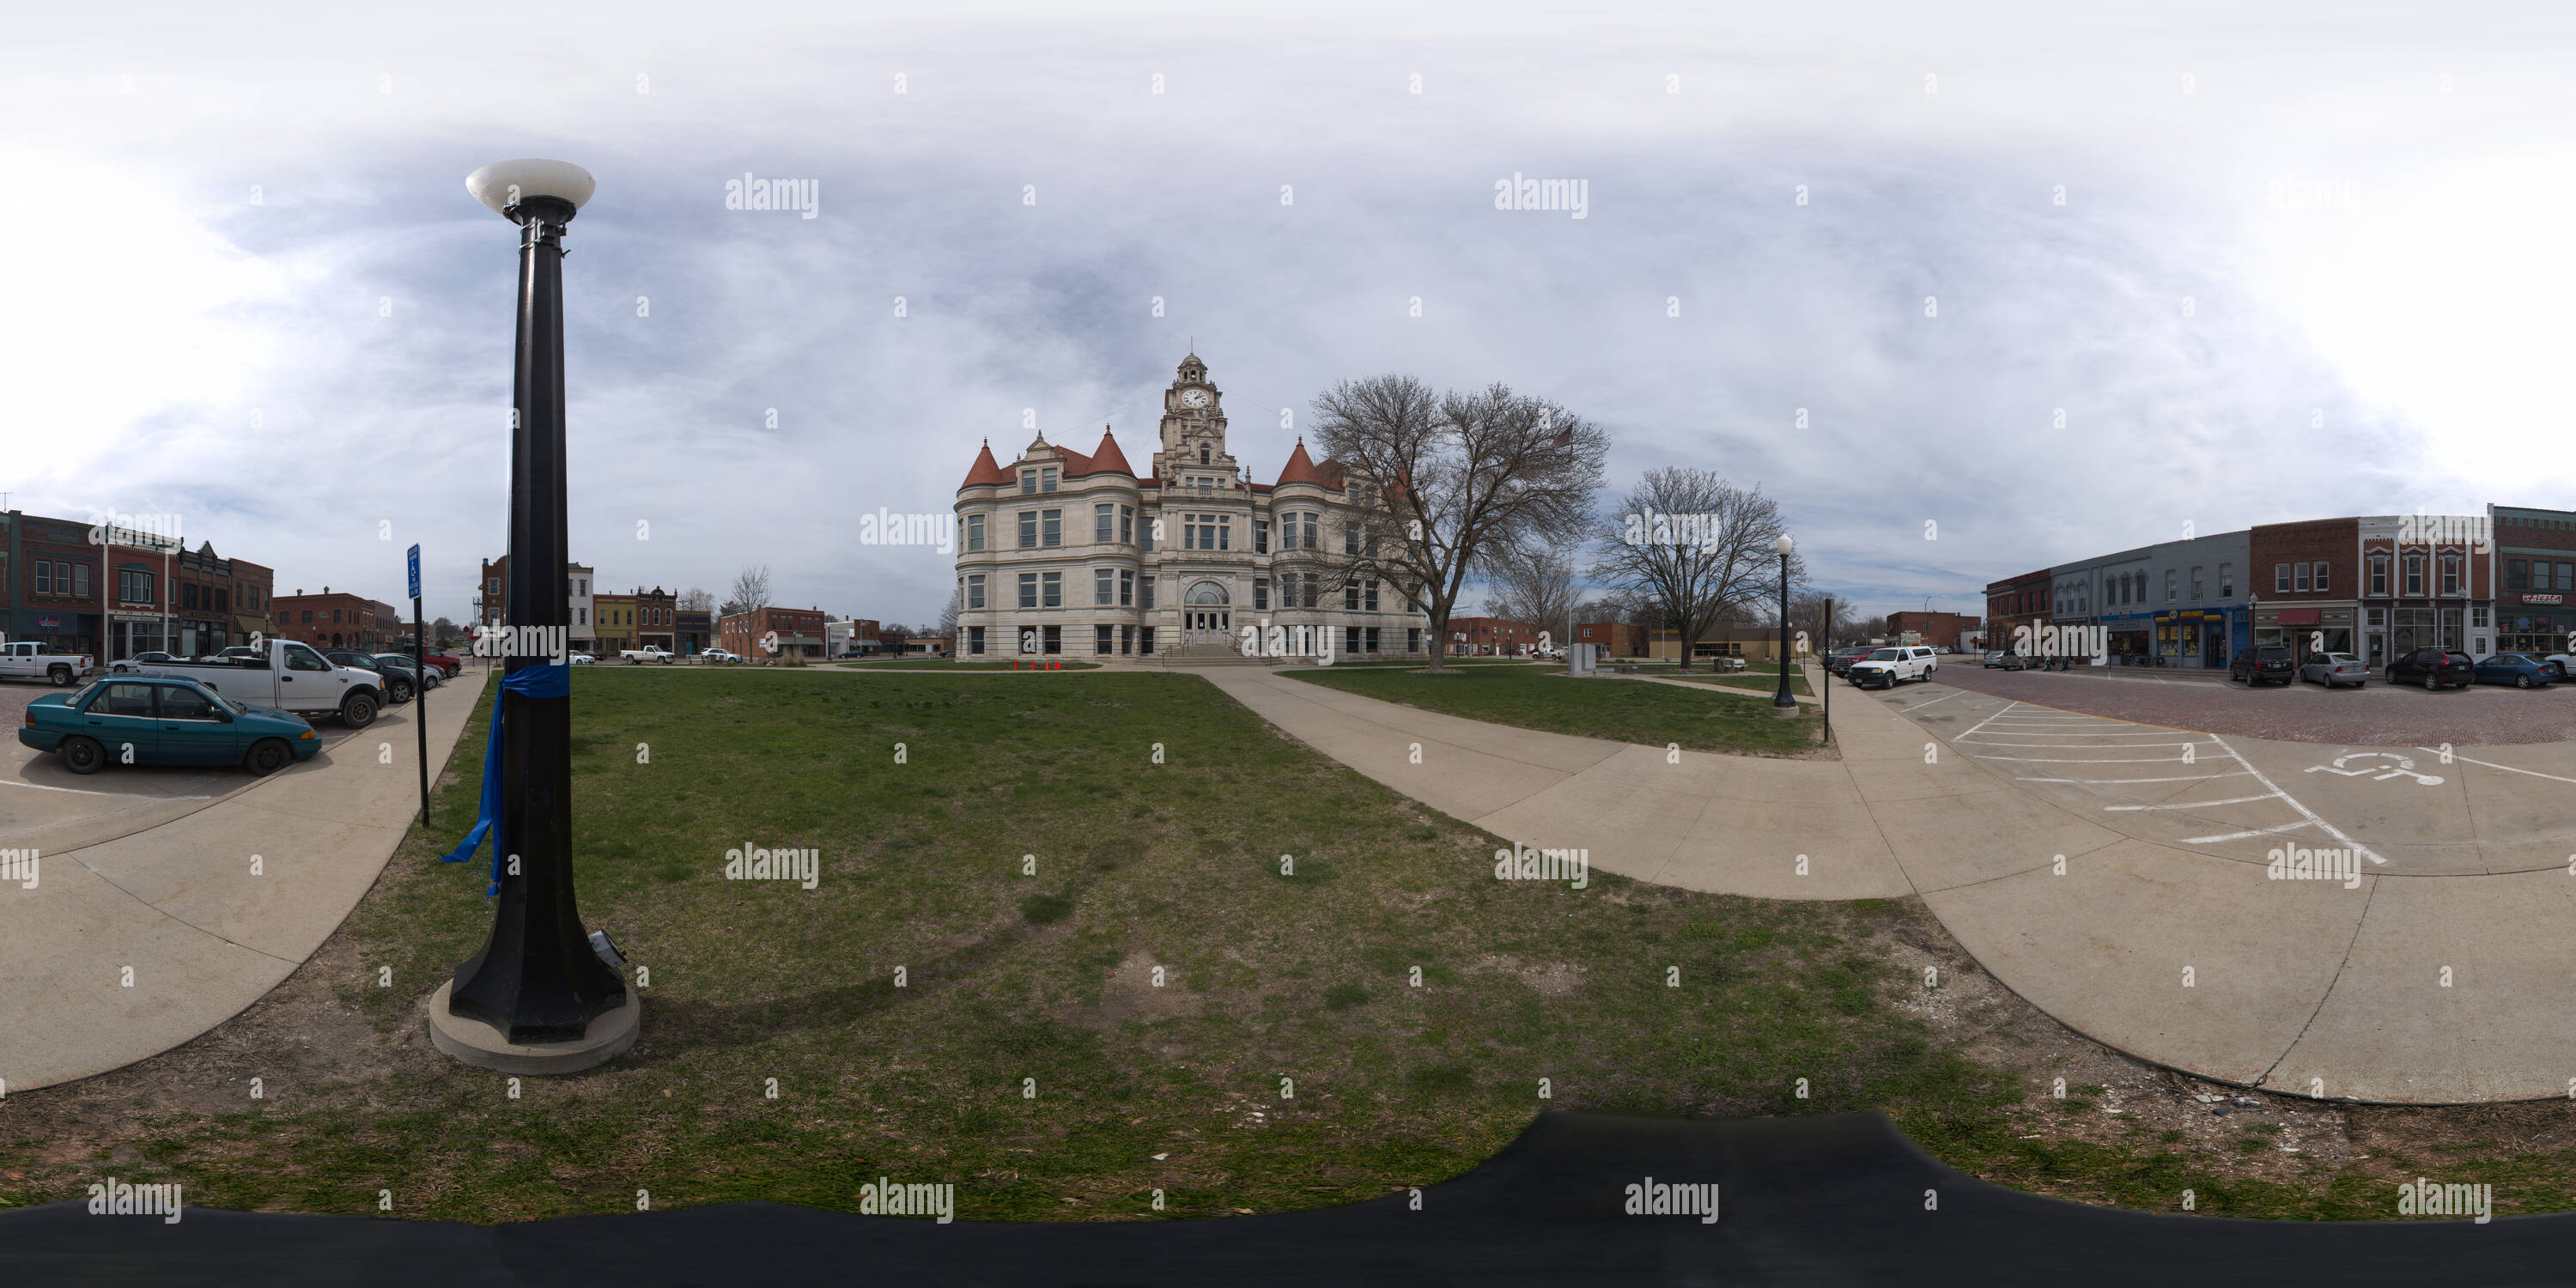 360 degree panoramic view of Dallas County, Iowa Courthouse and Main Square